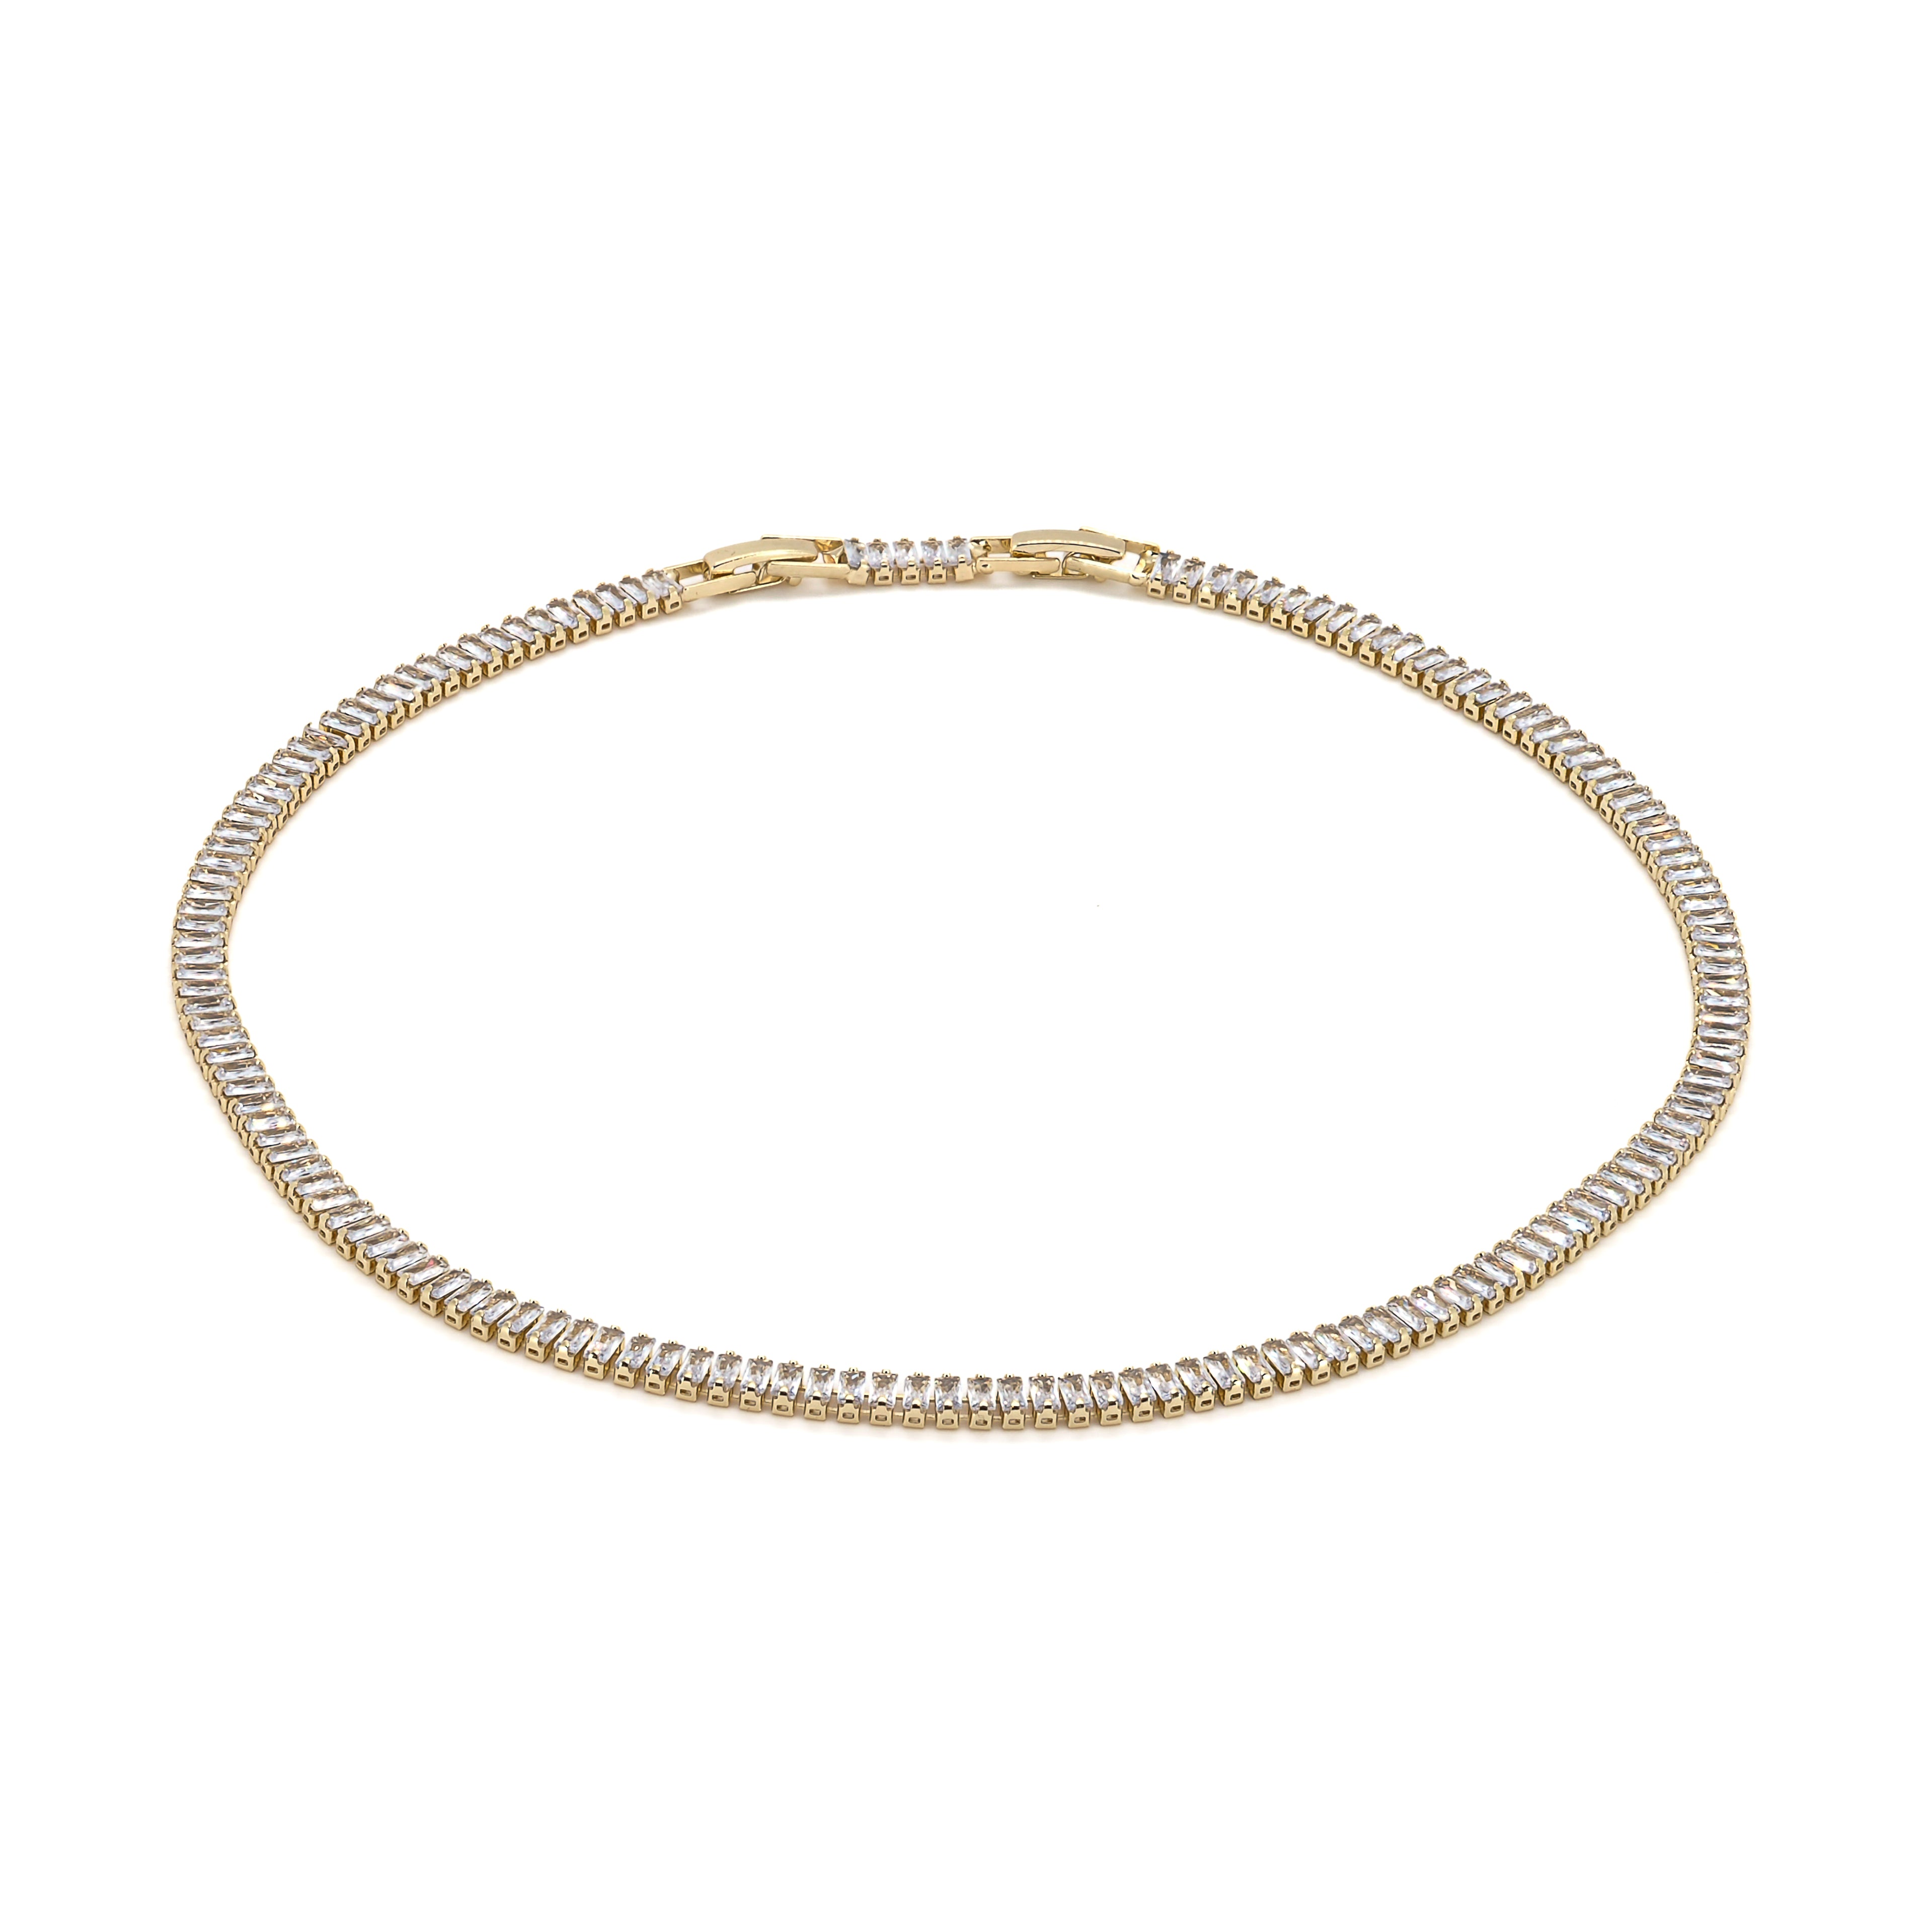 Baguette Diamond Gold Choker Necklace in 18K gold-plated brass and CZ Diamonds, elegant and luxurious jewelry.